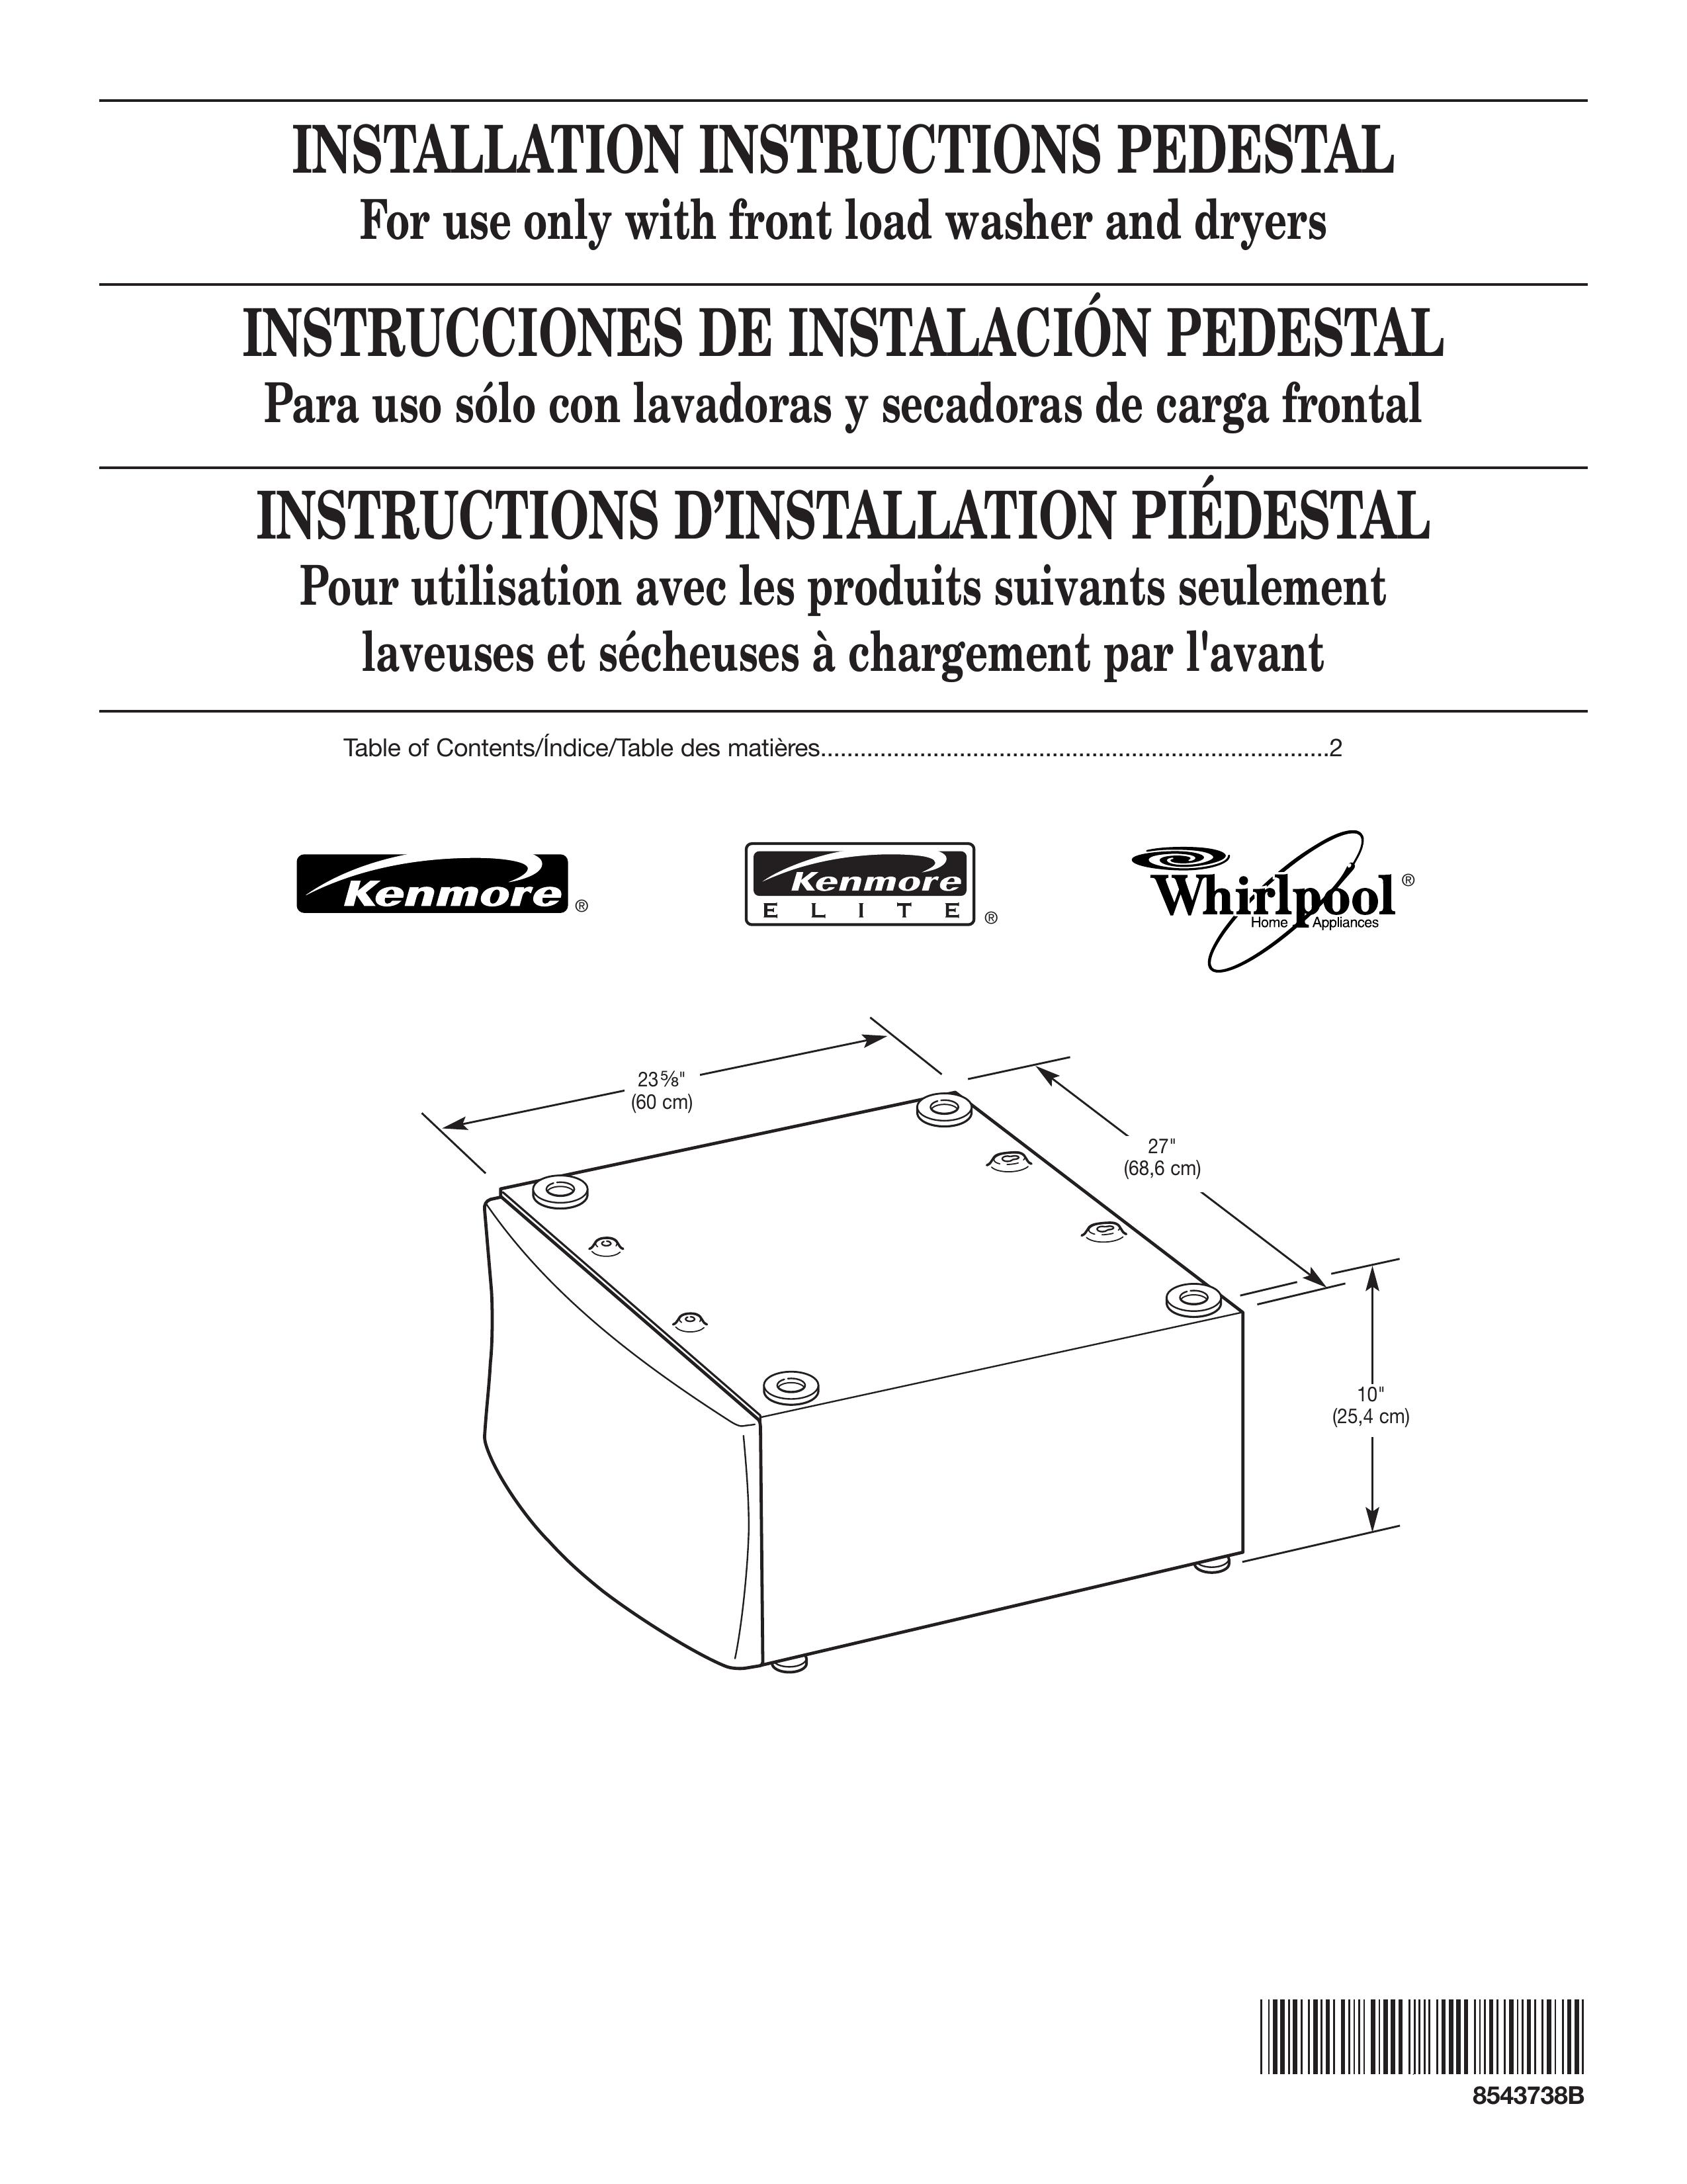 Whirlpool 8543738B Dryer Accessories User Manual (Page 1)